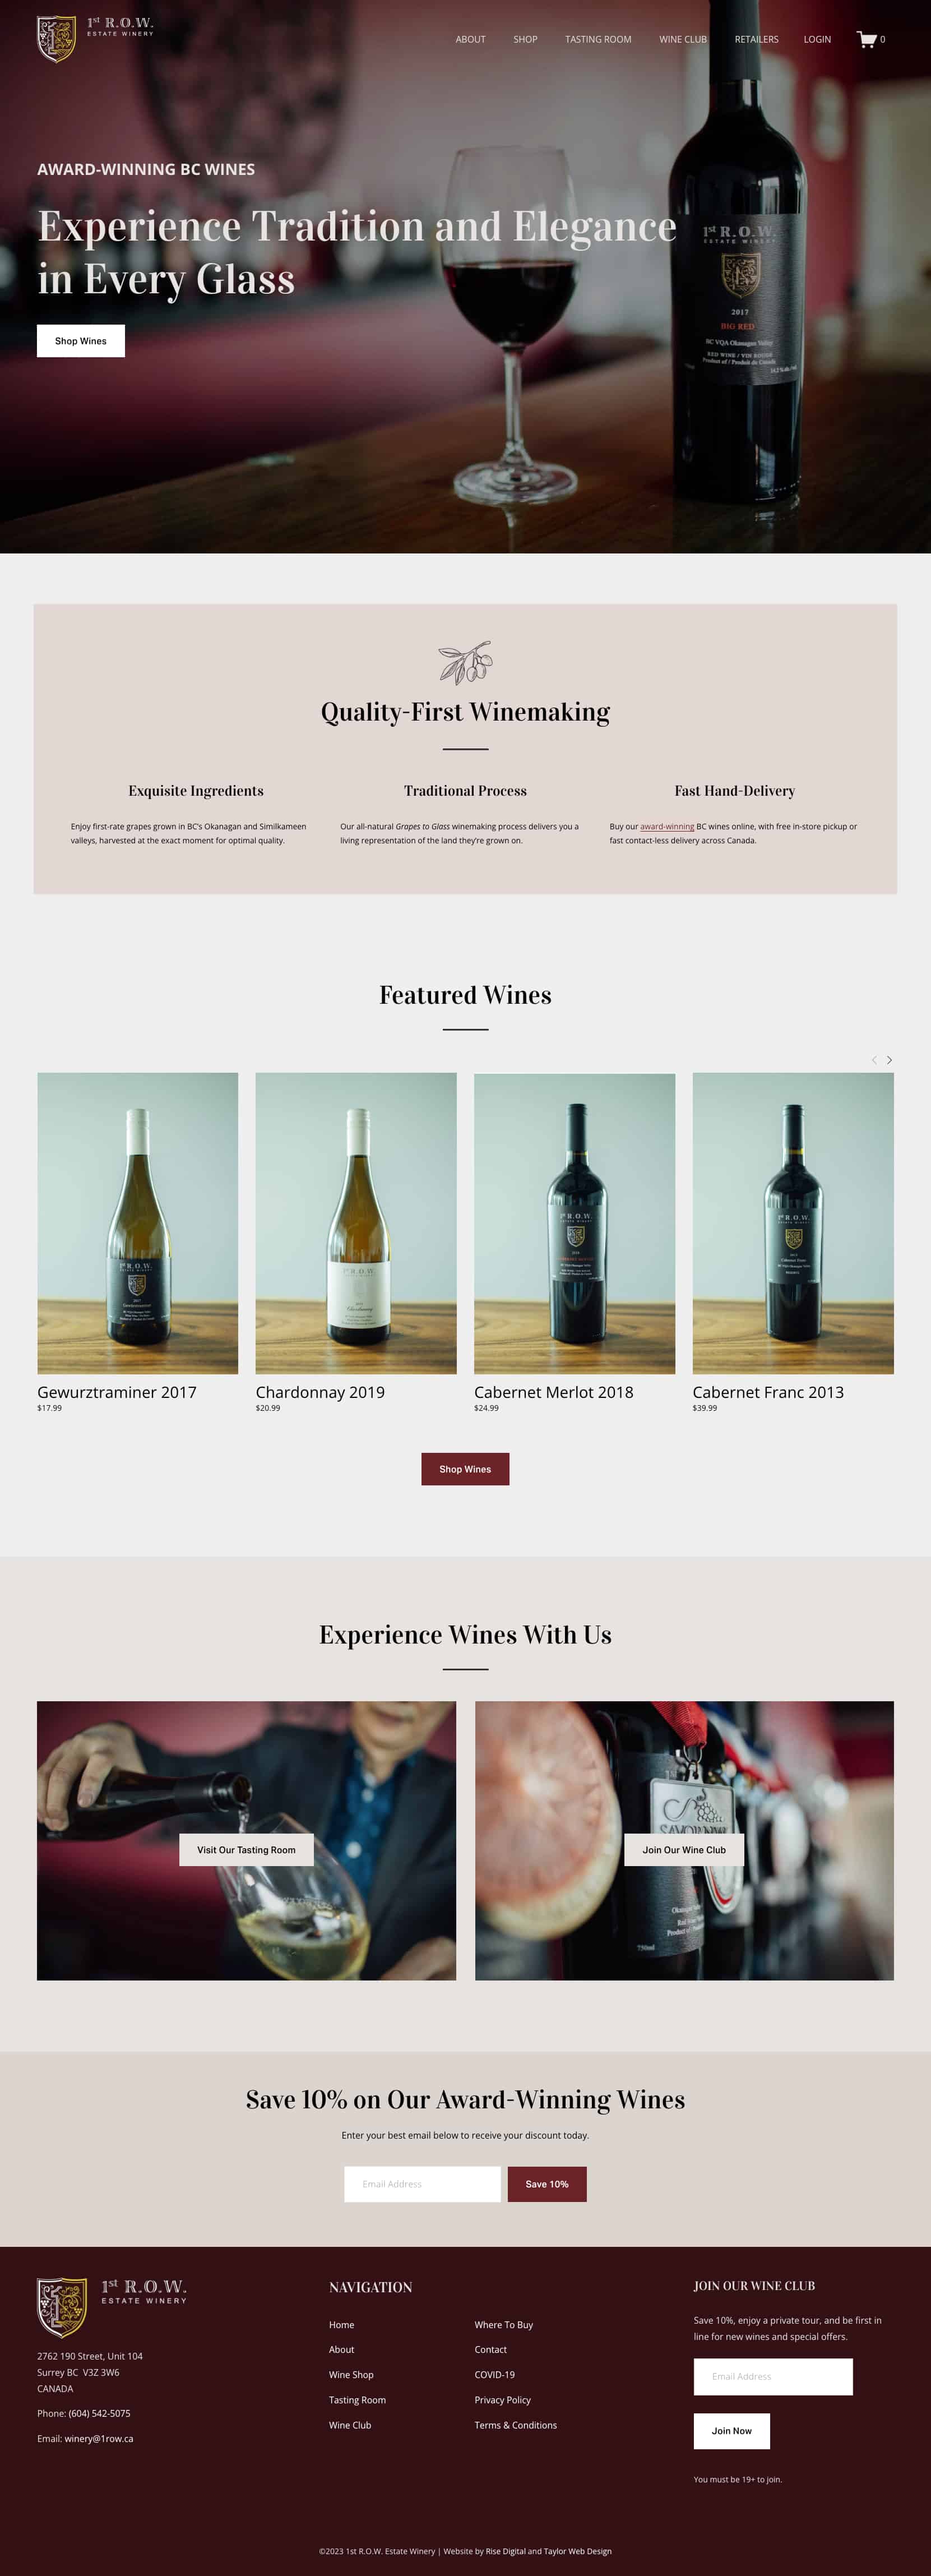 Squarespace Ecommerce Examples 2: 1st R.O.W. - Immersive UX with Minimalist Navigation